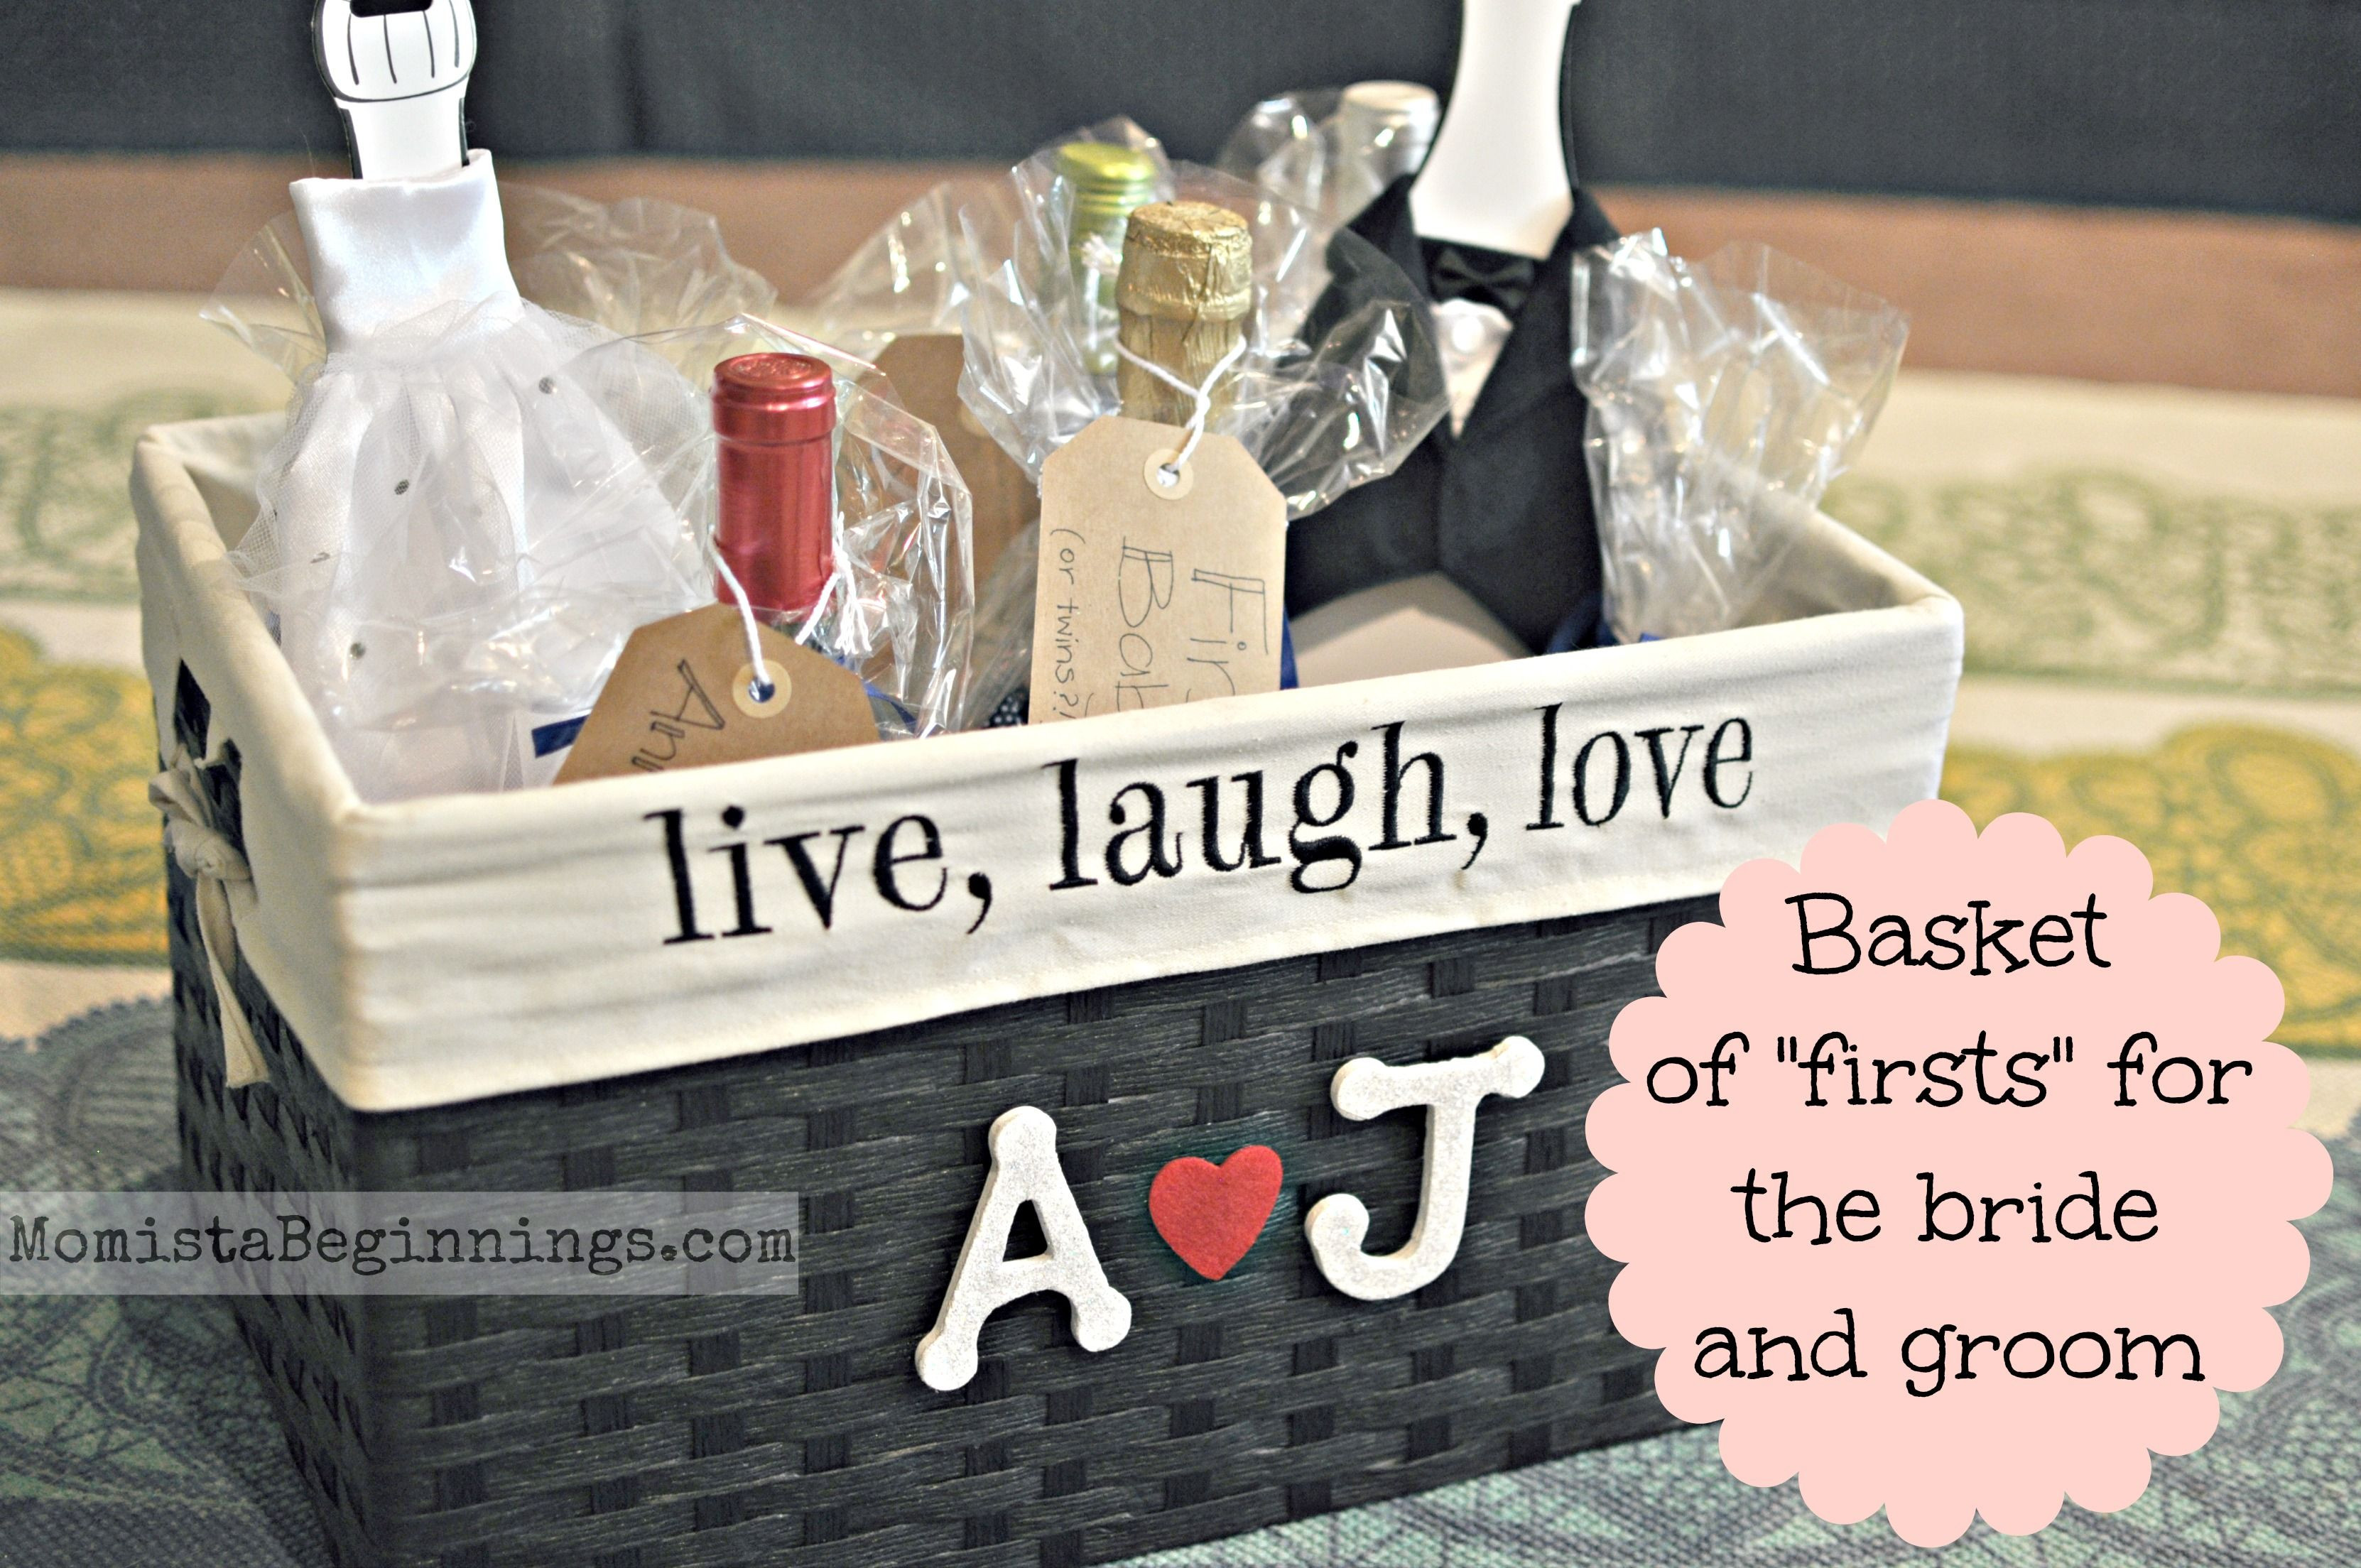 Wedding Gift Ideas For Bride
 Basket of "firsts" bridal shower t This idea includes